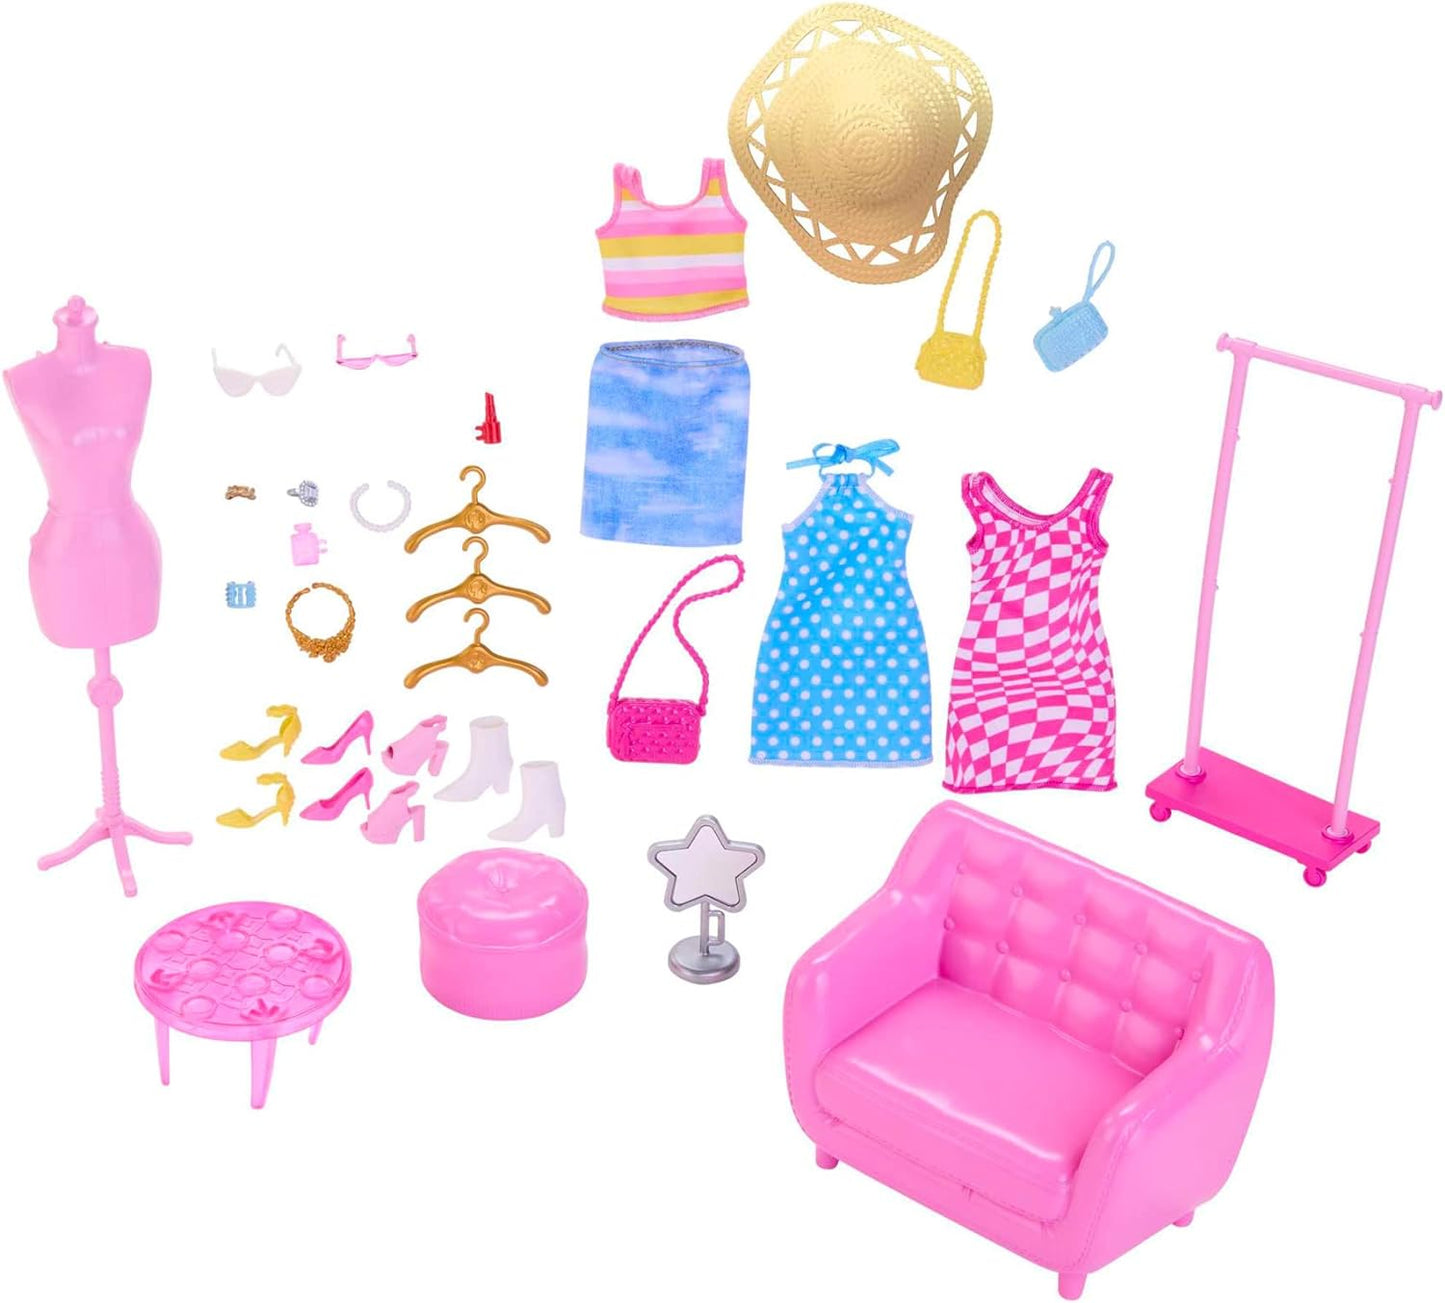 Barbie Stylist and Wardrobe Doll with Fashion Accessories